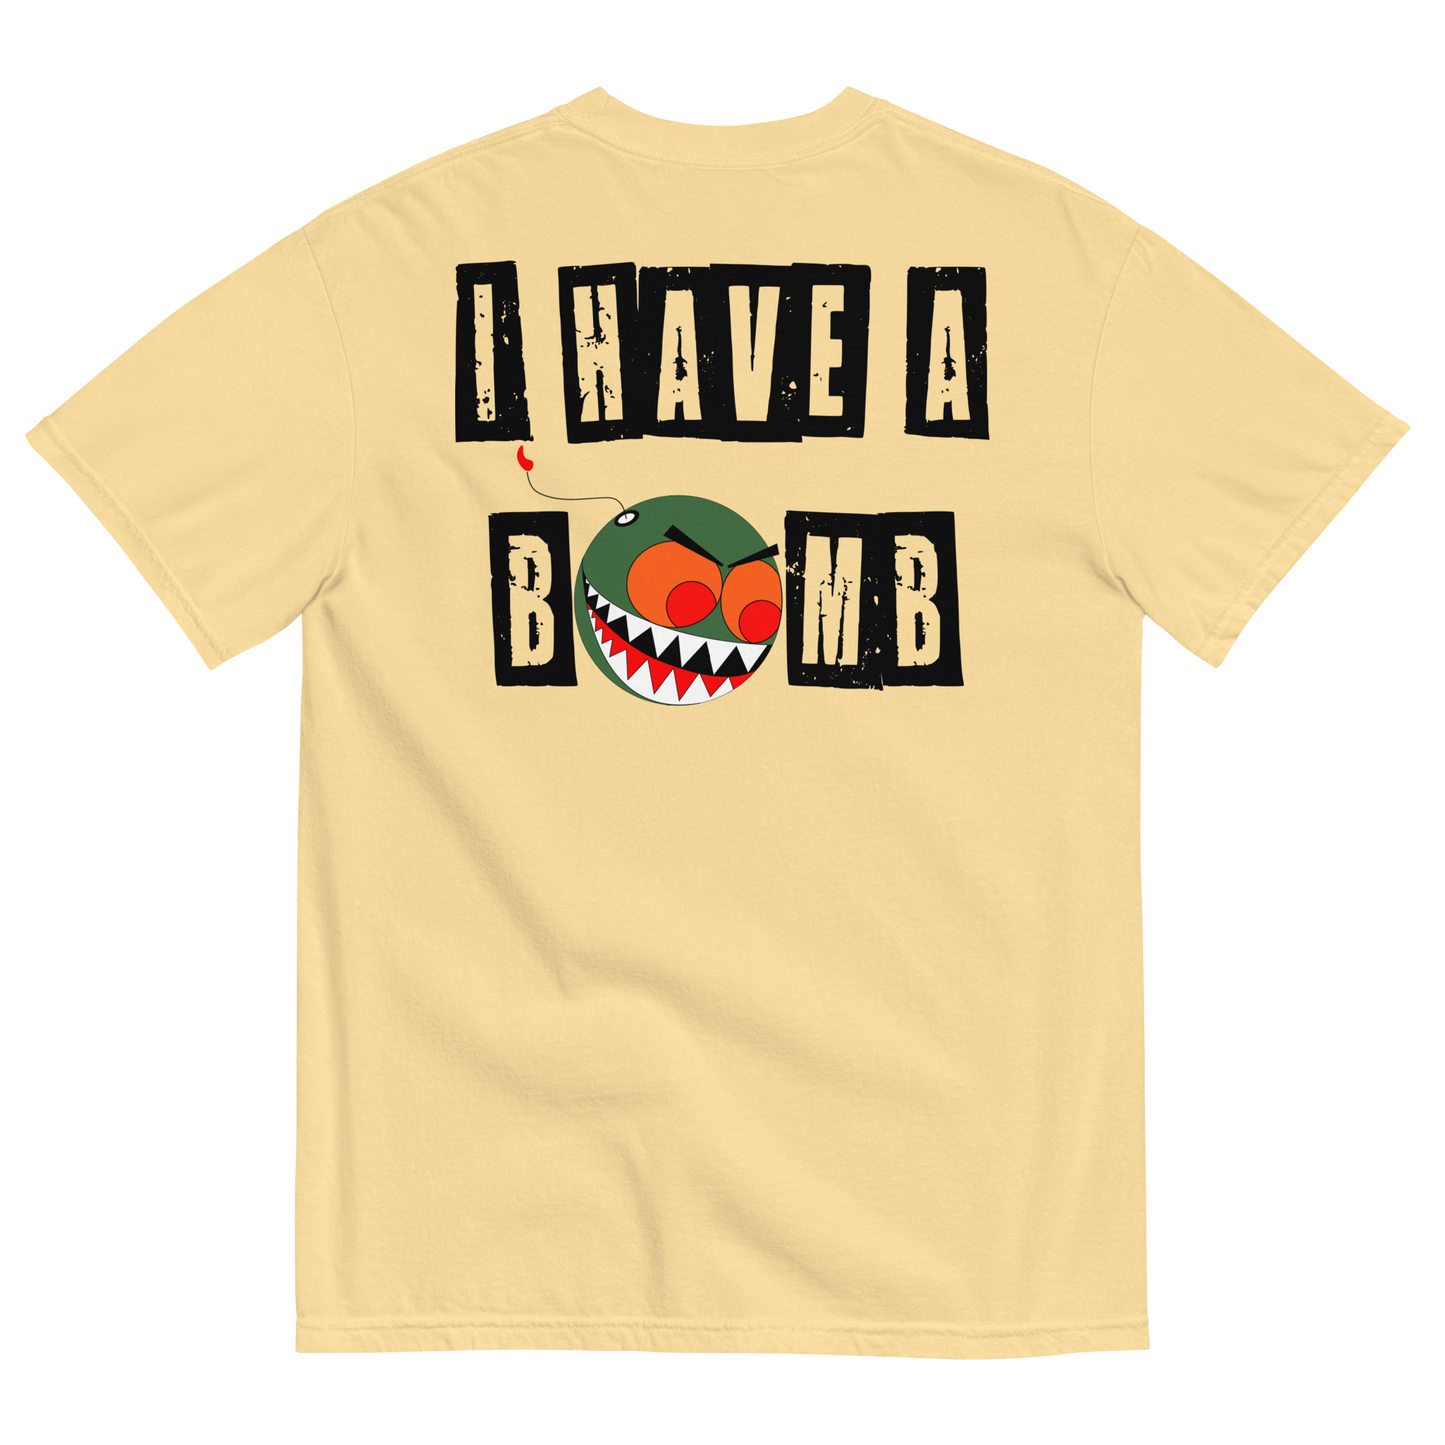 I HAVE A BOMB TEE BLACK TEXT (FRONT/BACK)